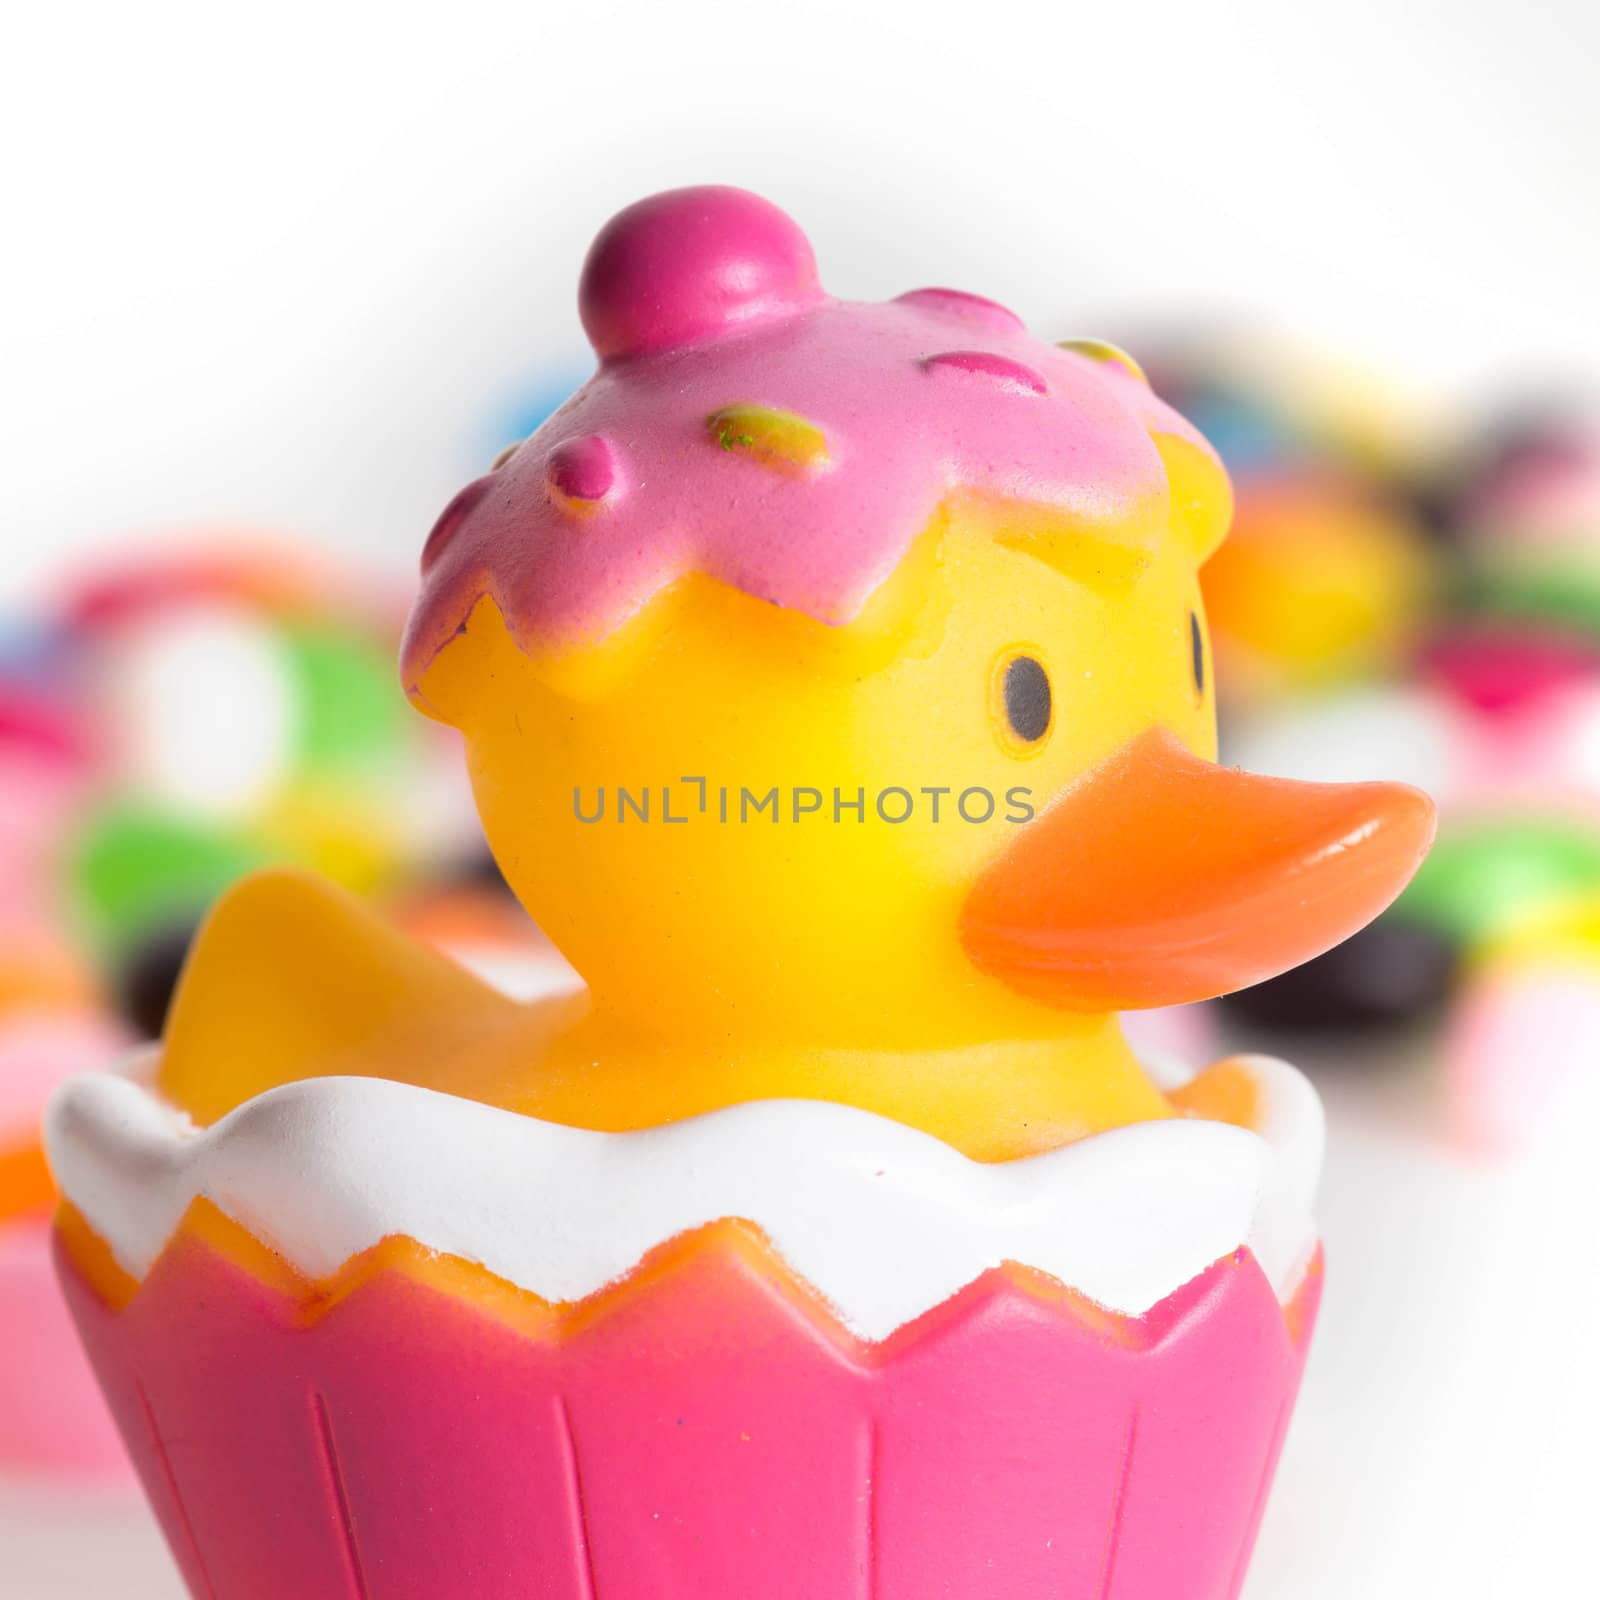 Easter rubber ducks with colorful jelly beans  out of focus in the background.  Isolated on white background